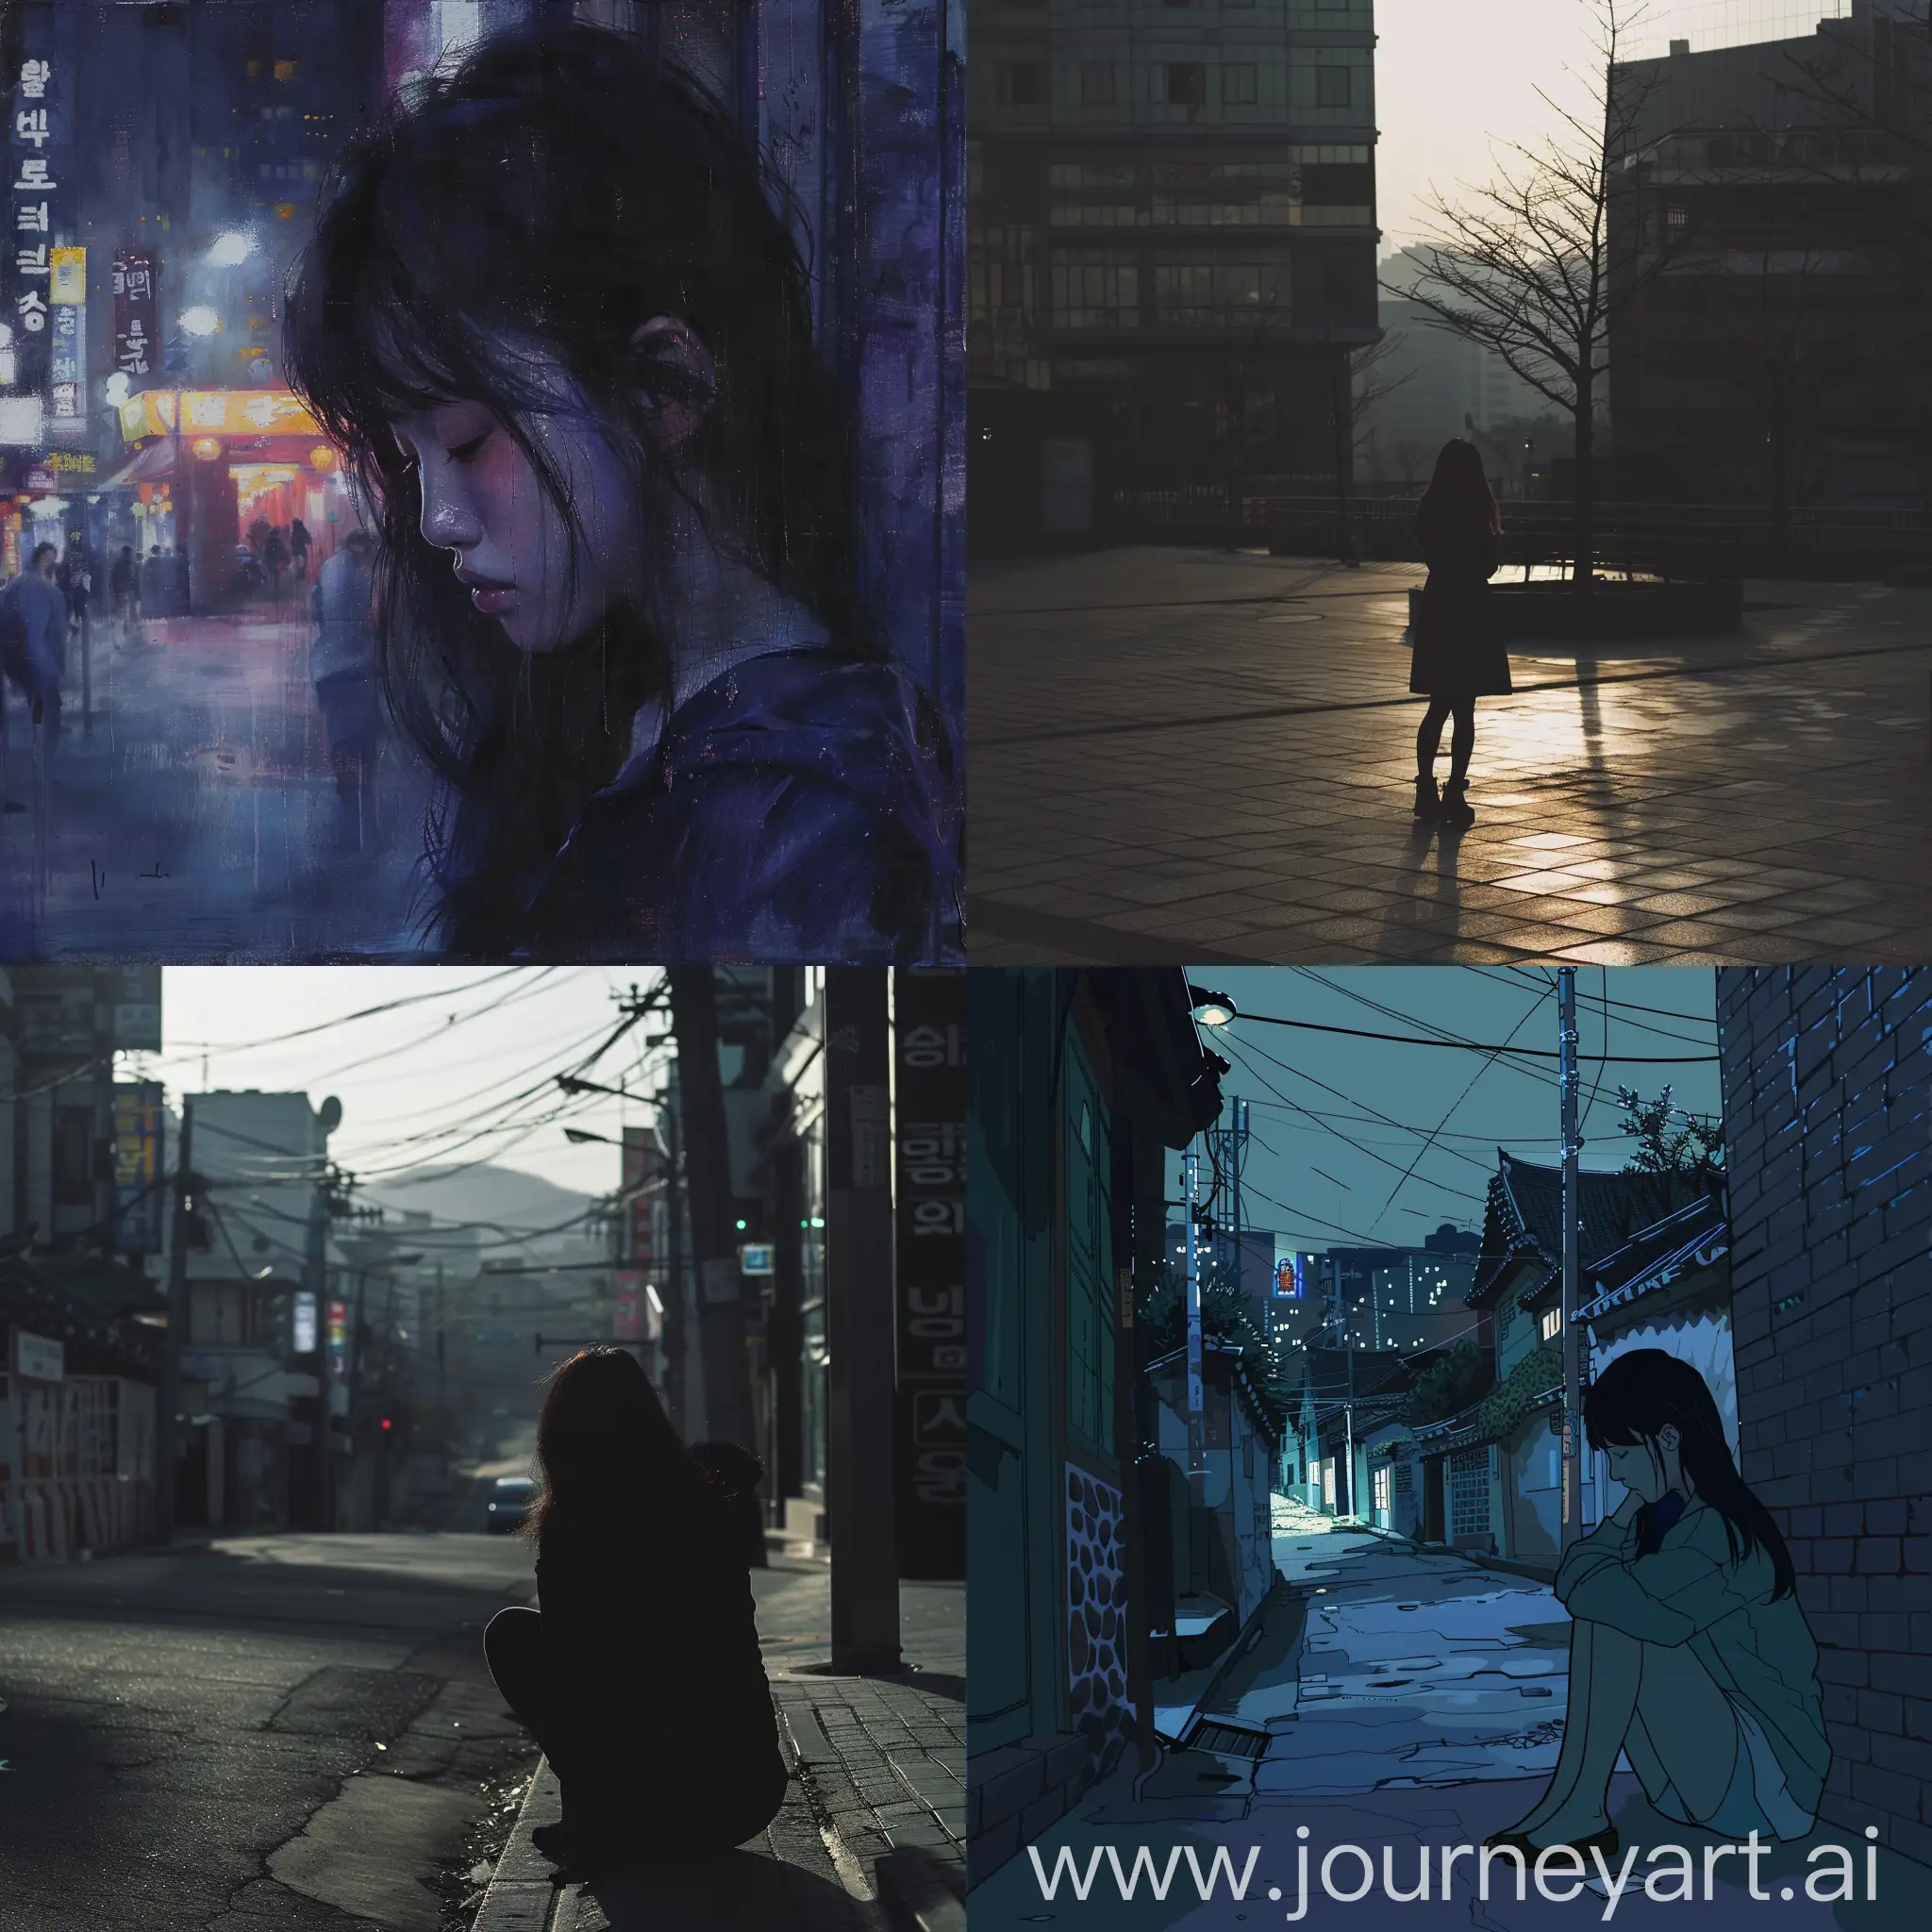 A lonely girl in Seoul